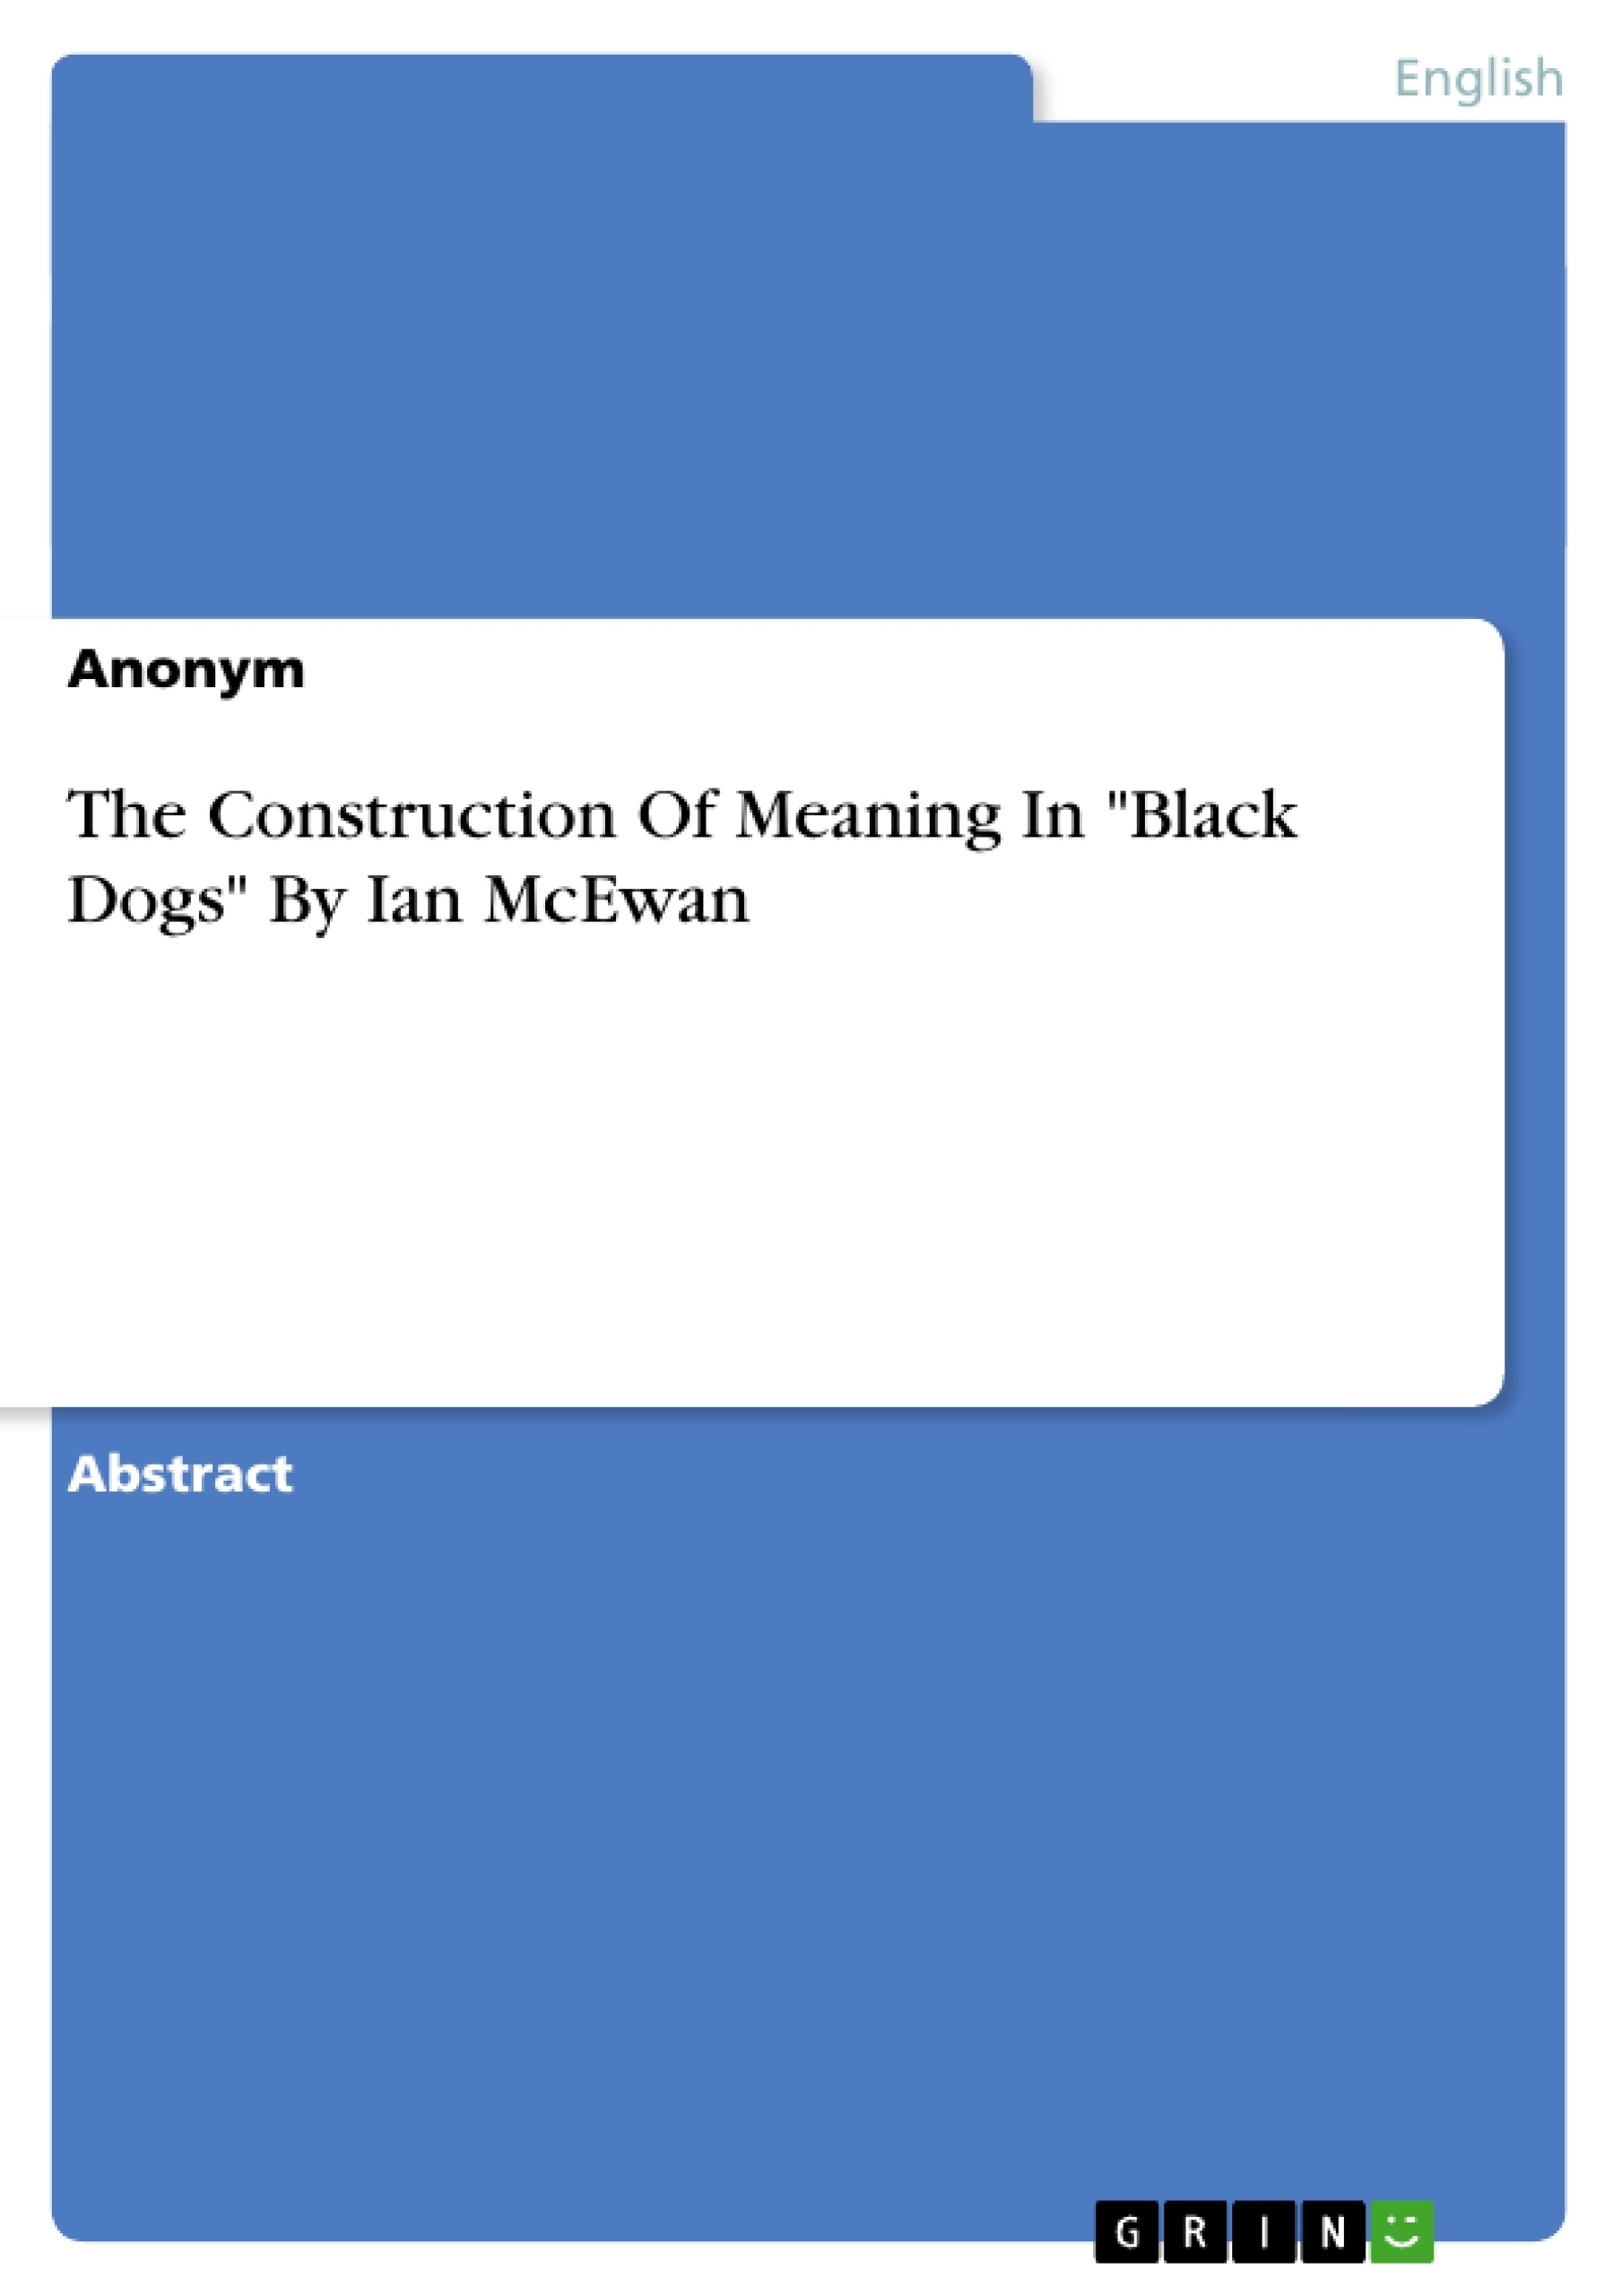 Title: The Construction Of Meaning In "Black Dogs" By
Ian McEwan